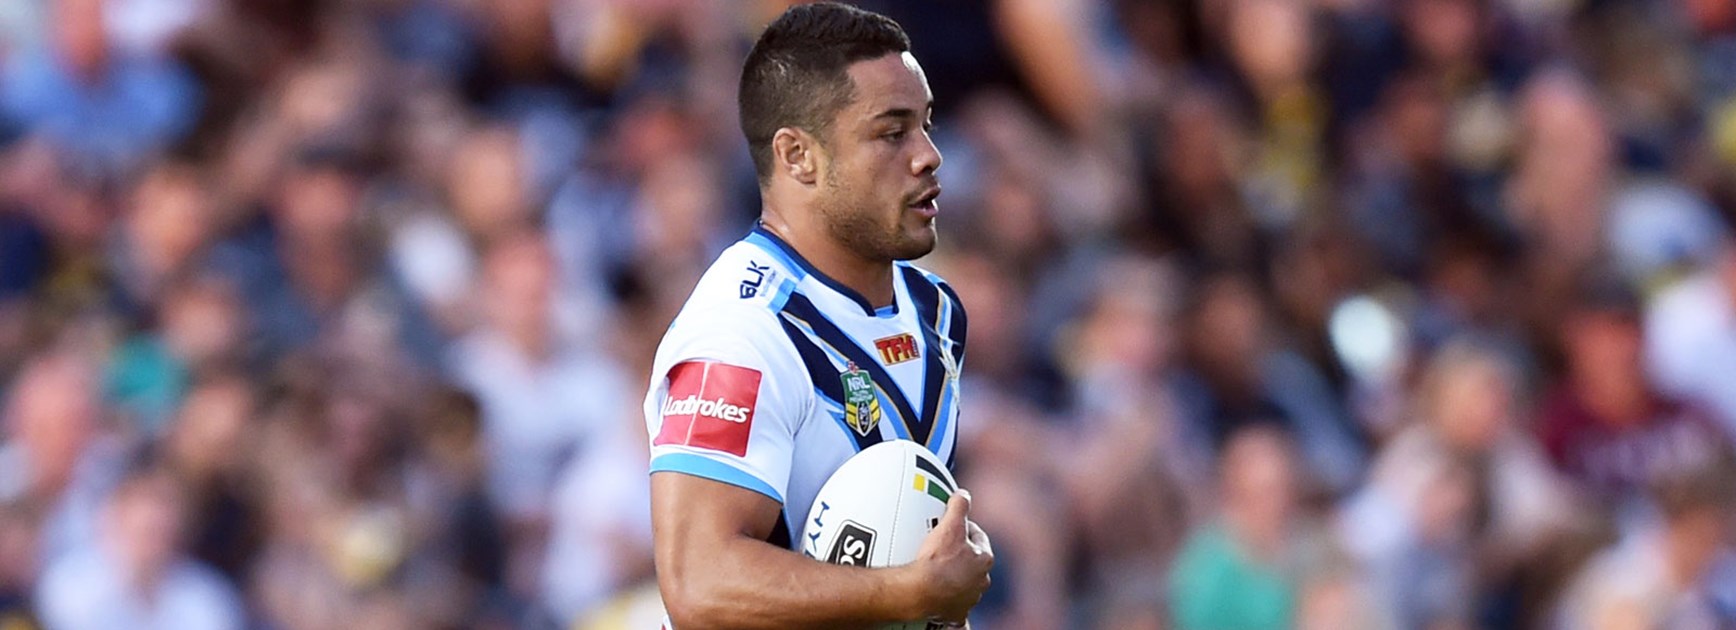 The Titans will be hoping Jarryd Hayne rises to the occasion in their elimination final with the Broncos.